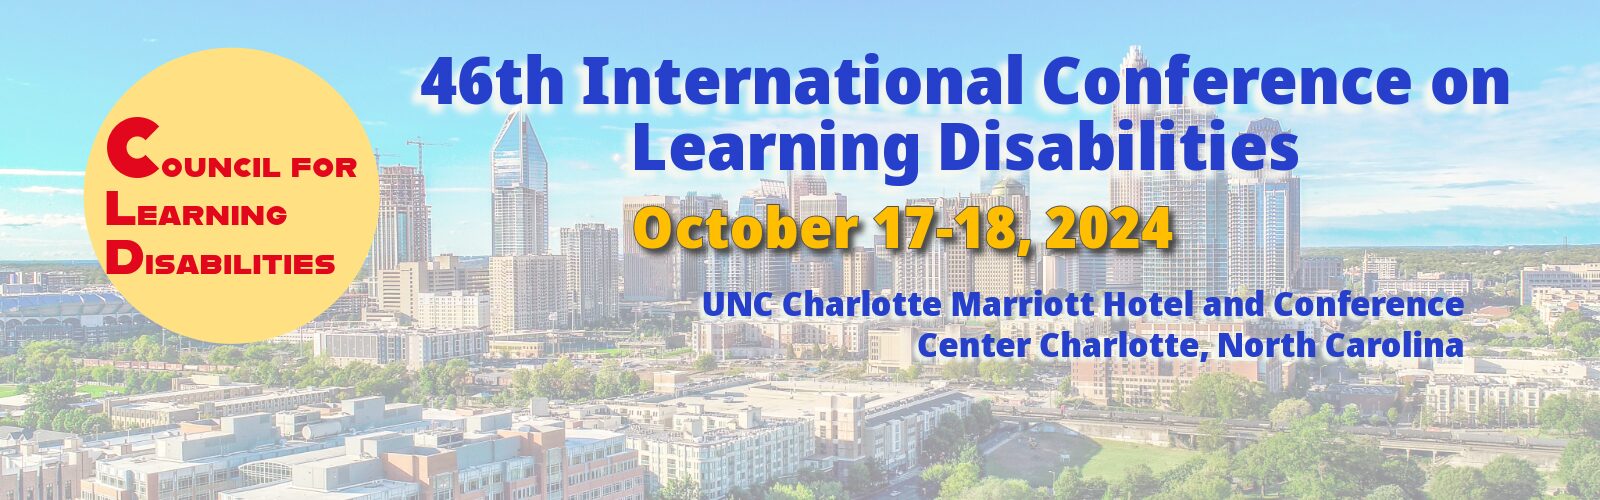 46th International Conference on Learning Disabilities October 17-18, 2024 | UNC Charlotte Marriott Hotel and Conference Center Charlotte, North Carolina Register Now Reserve Your Room